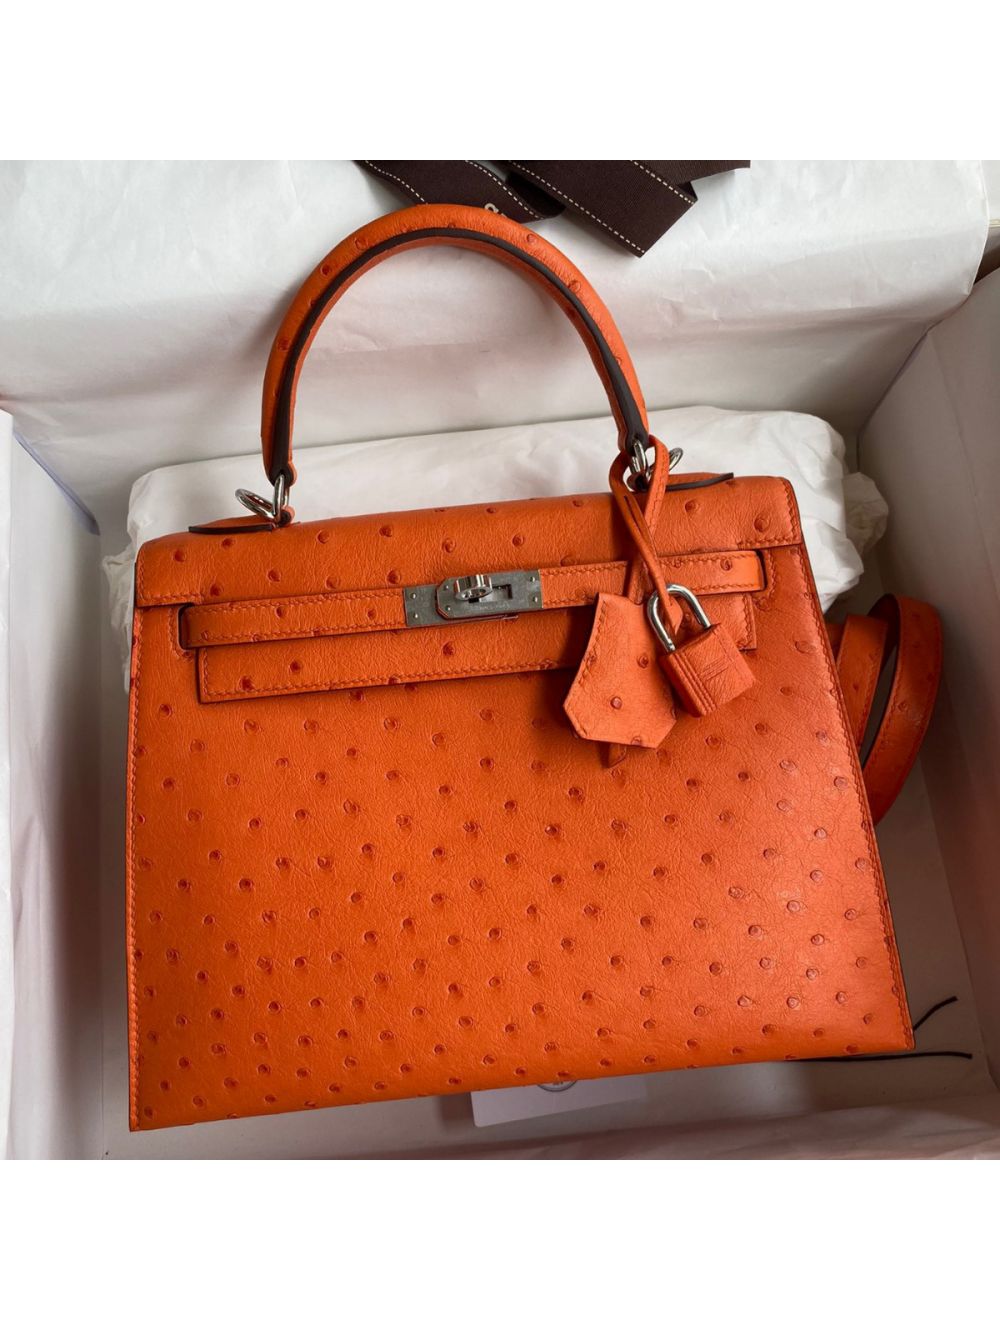 terre cuite ostrich hermes